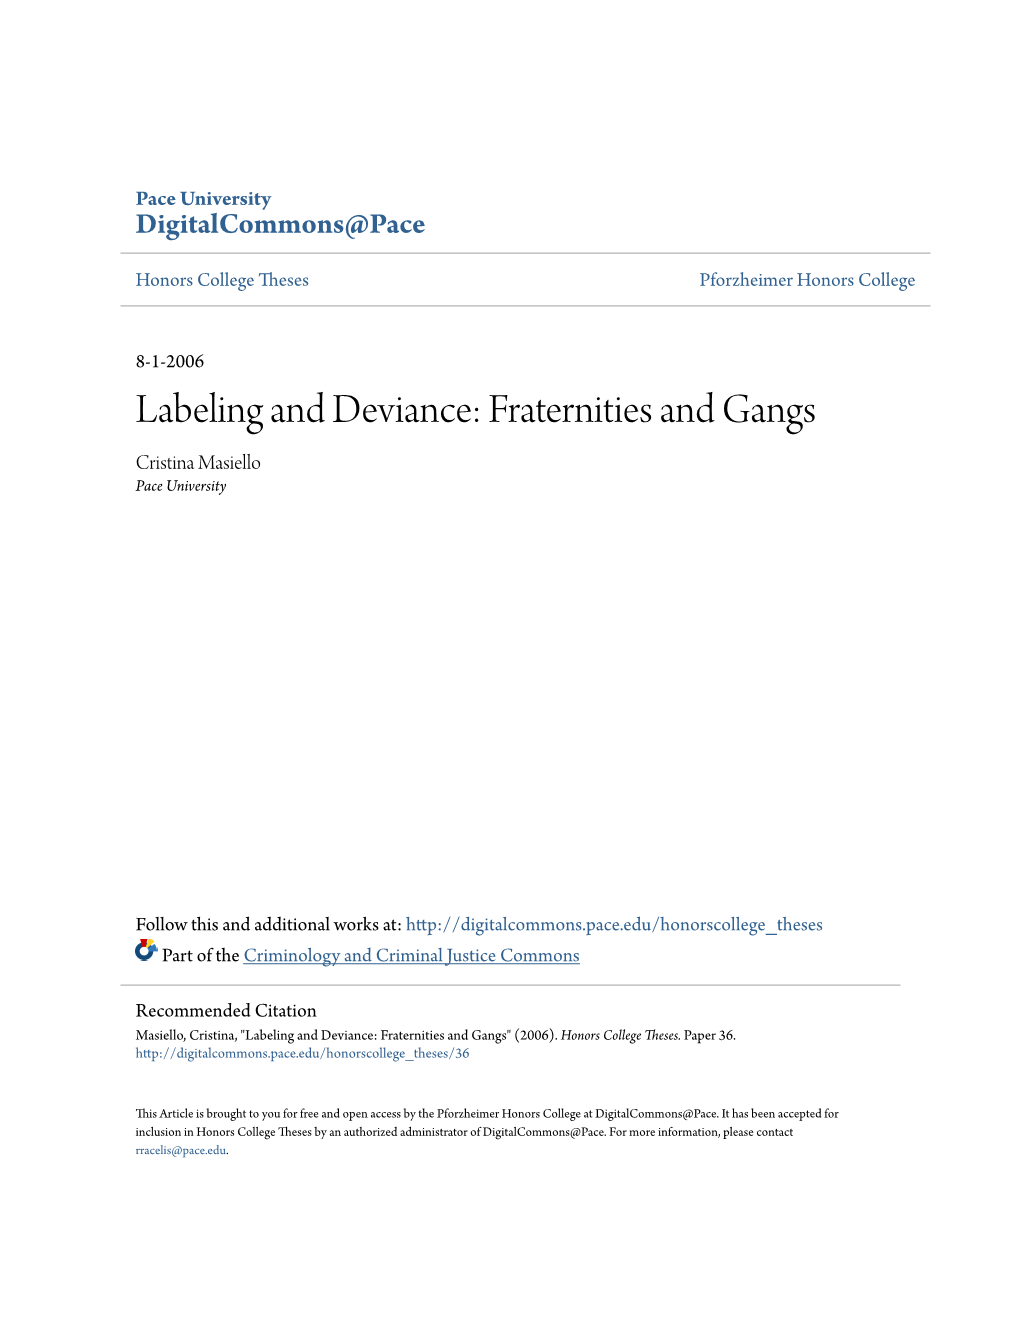 Labeling and Deviance: Fraternities and Gangs Cristina Masiello Pace University